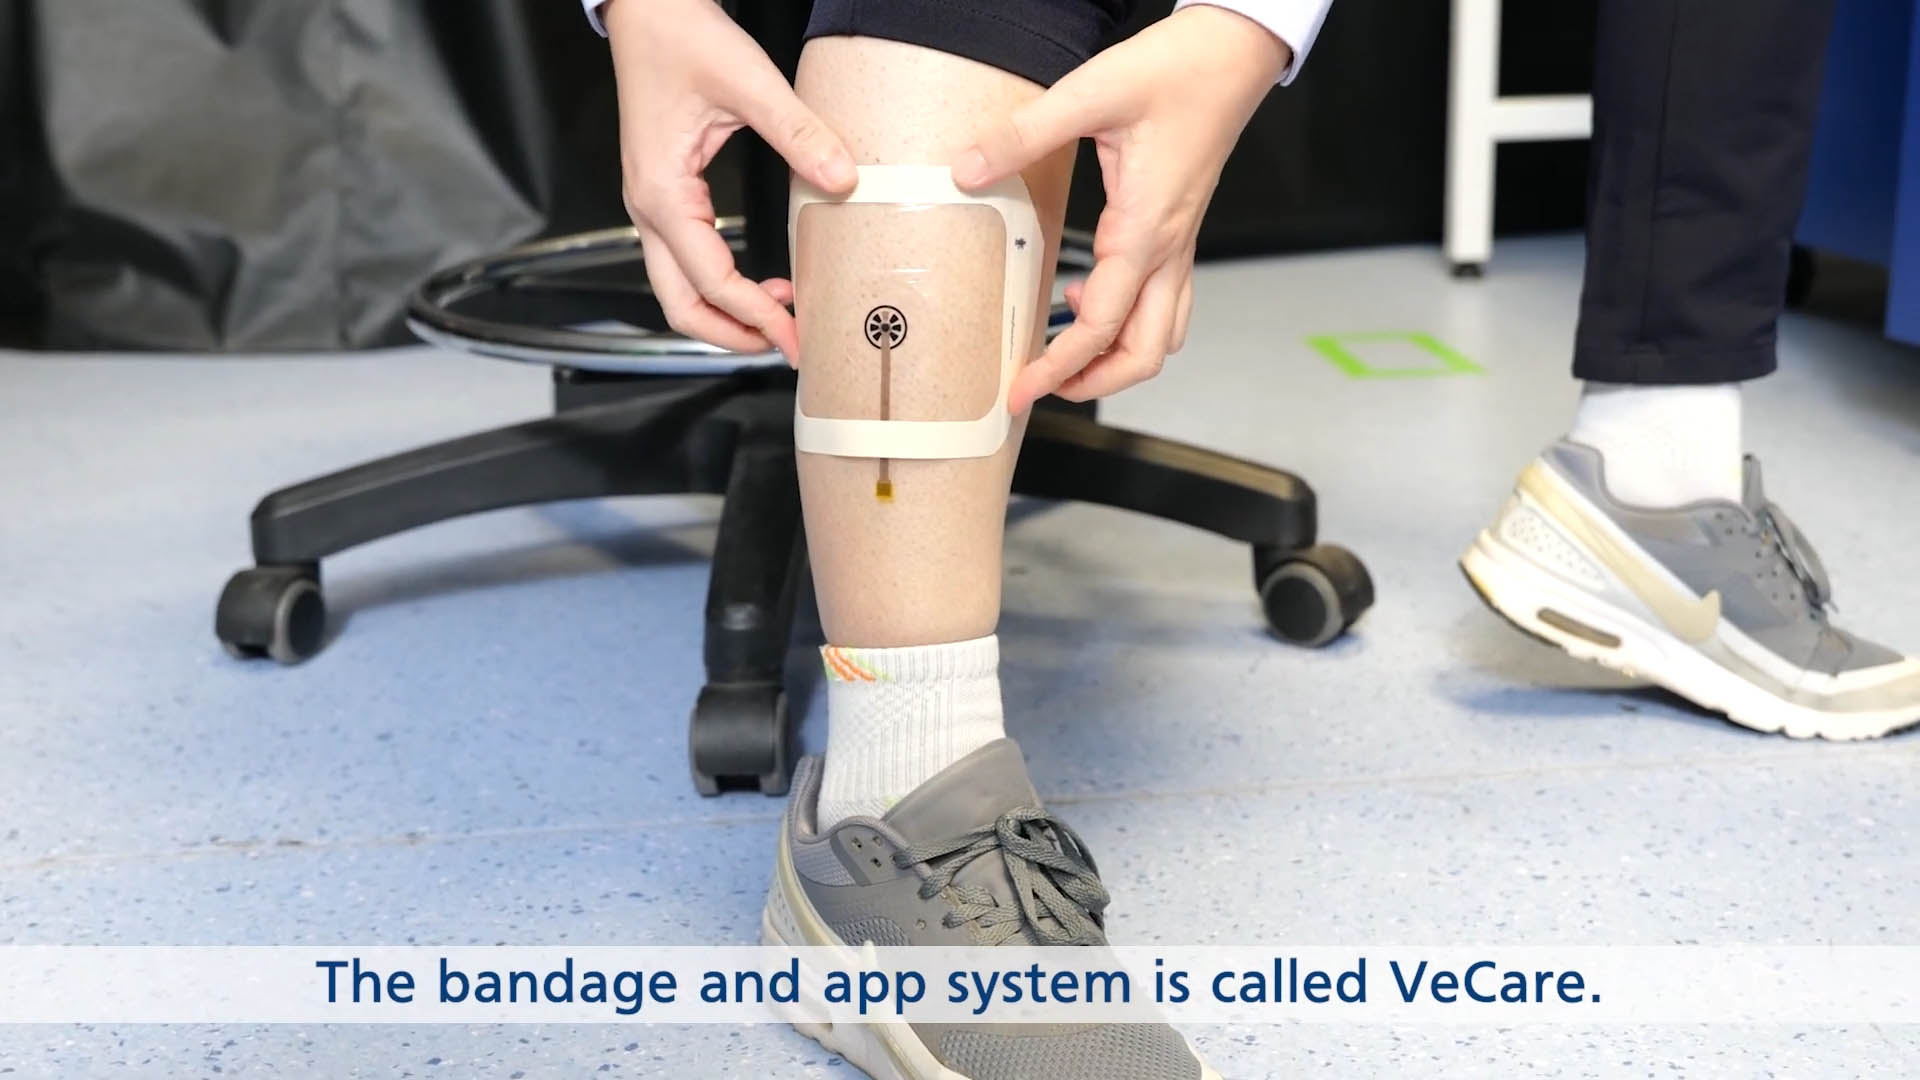 World's first smart bandage detects multiple biomarkers for onsite